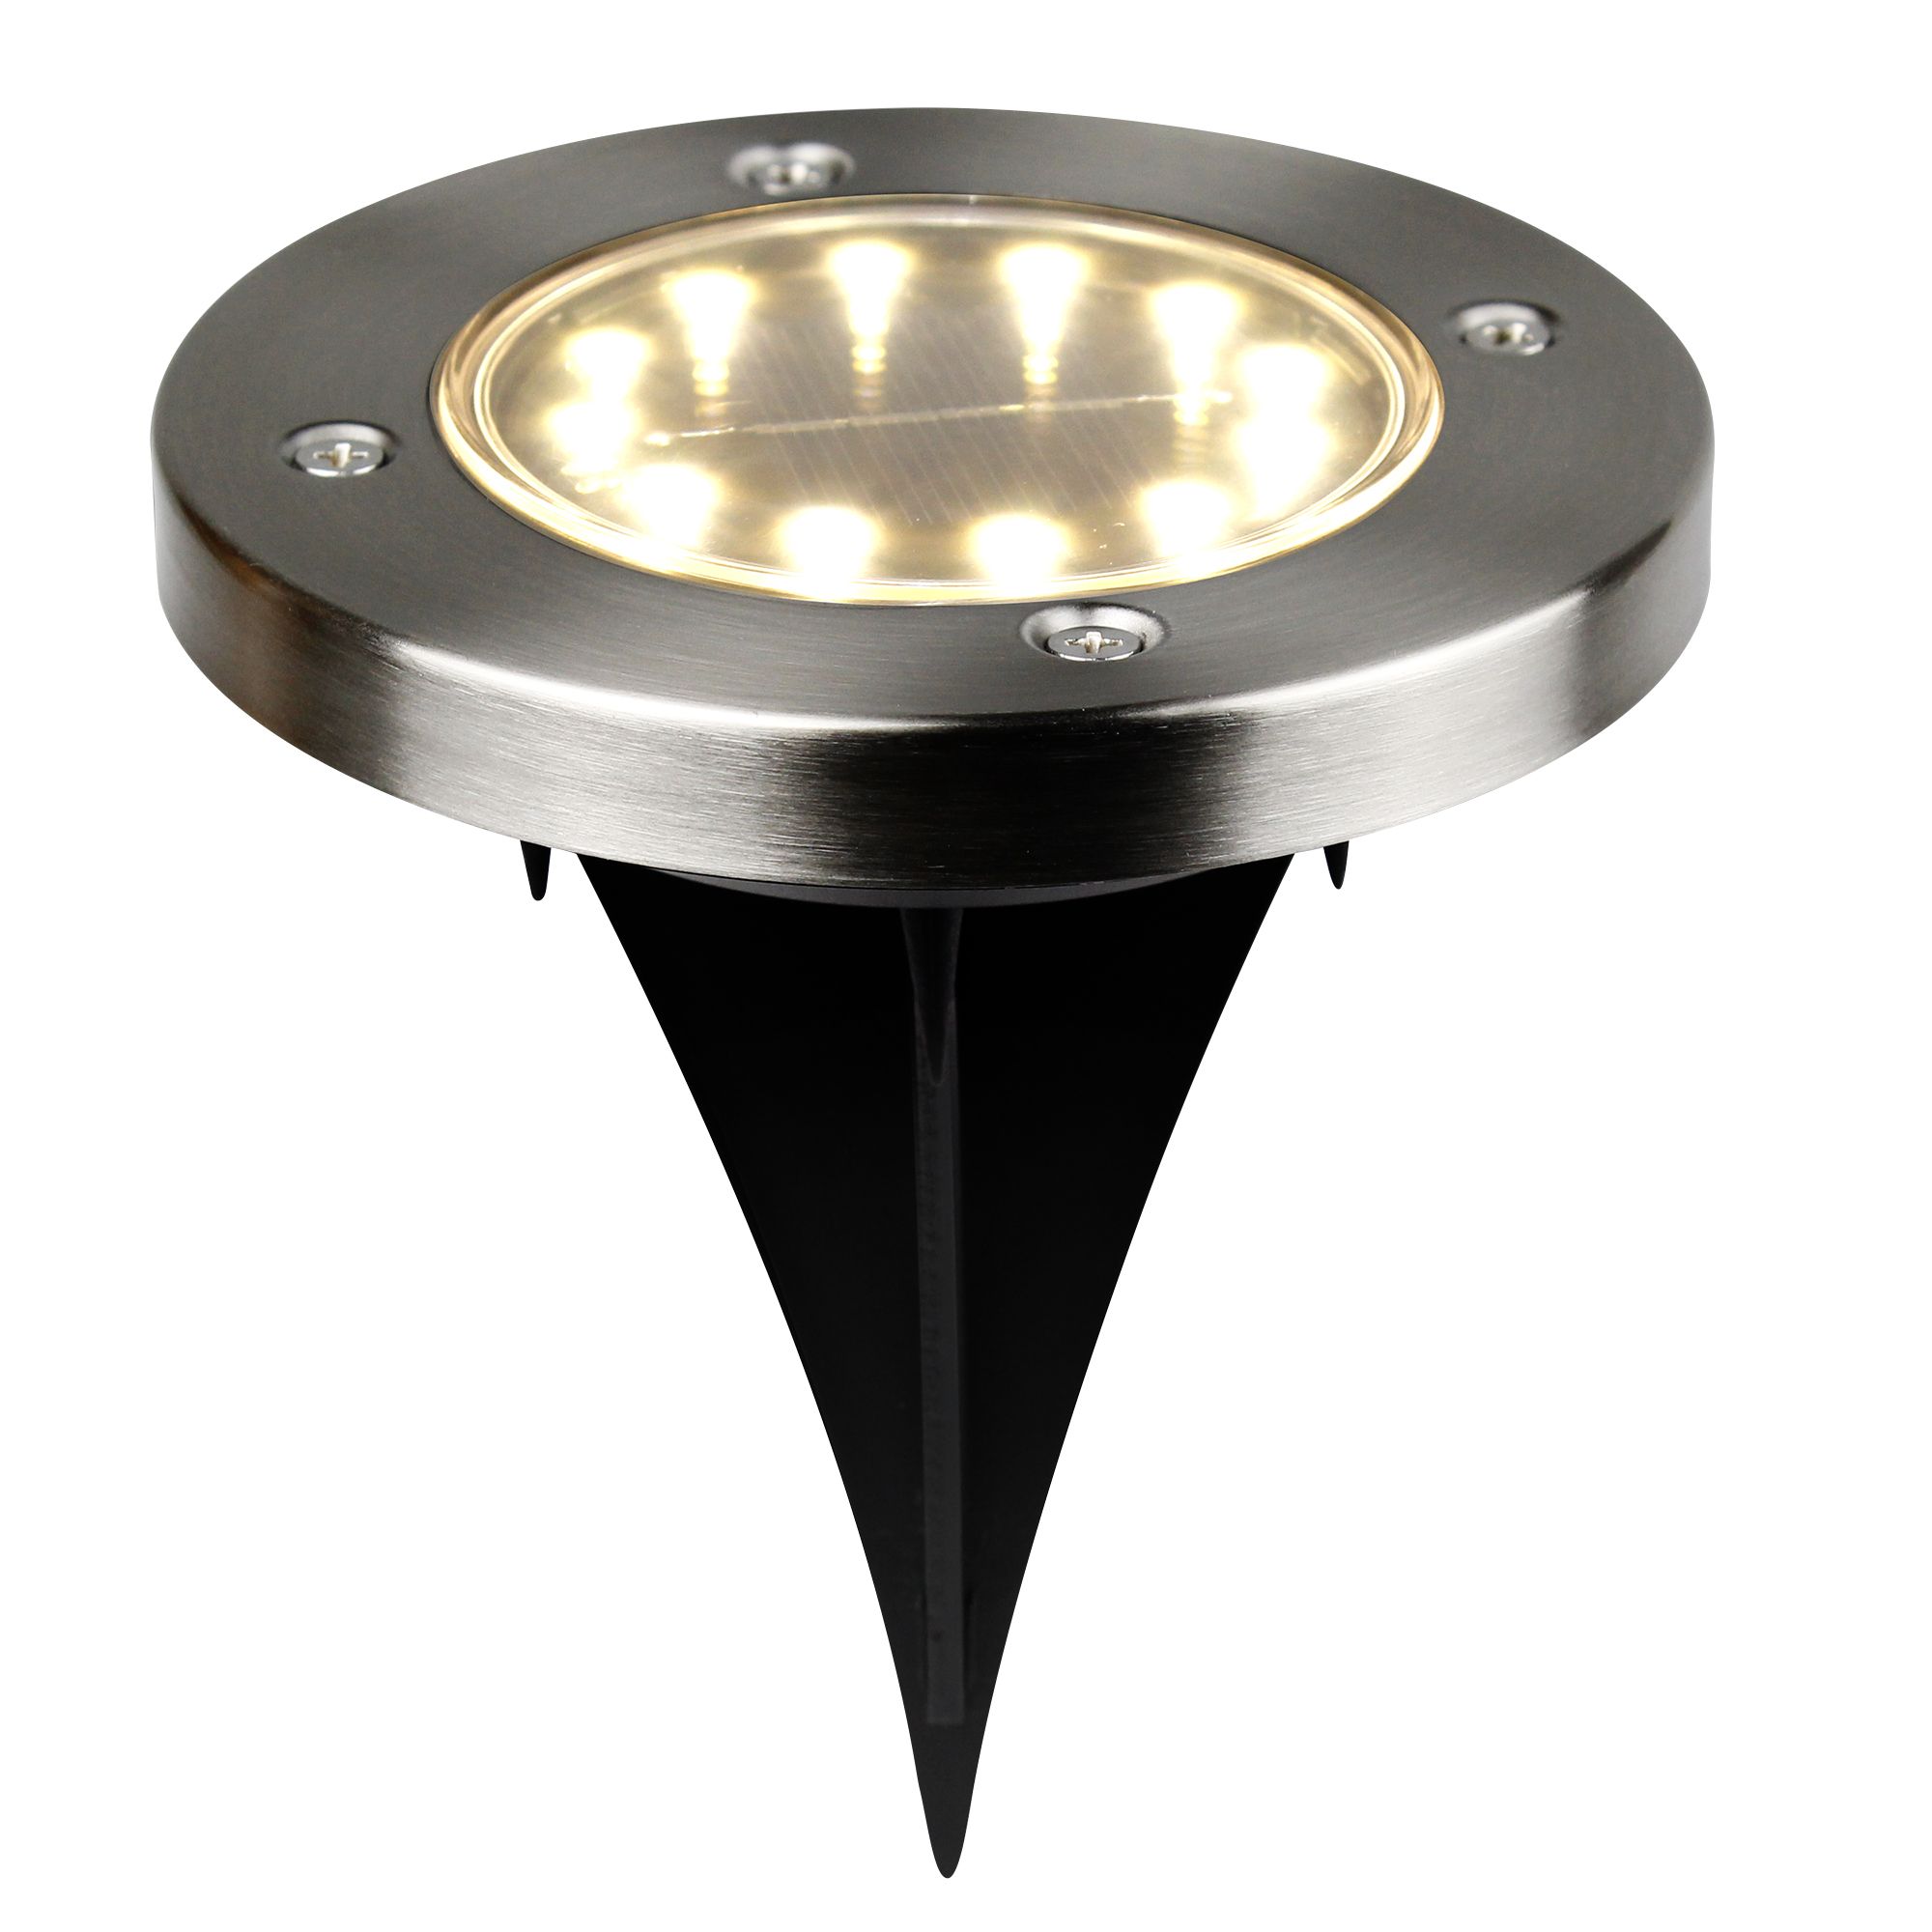 Gavea Grey & black Stainless steel effect Solar-powered Integrated LED Outdoor Ground light